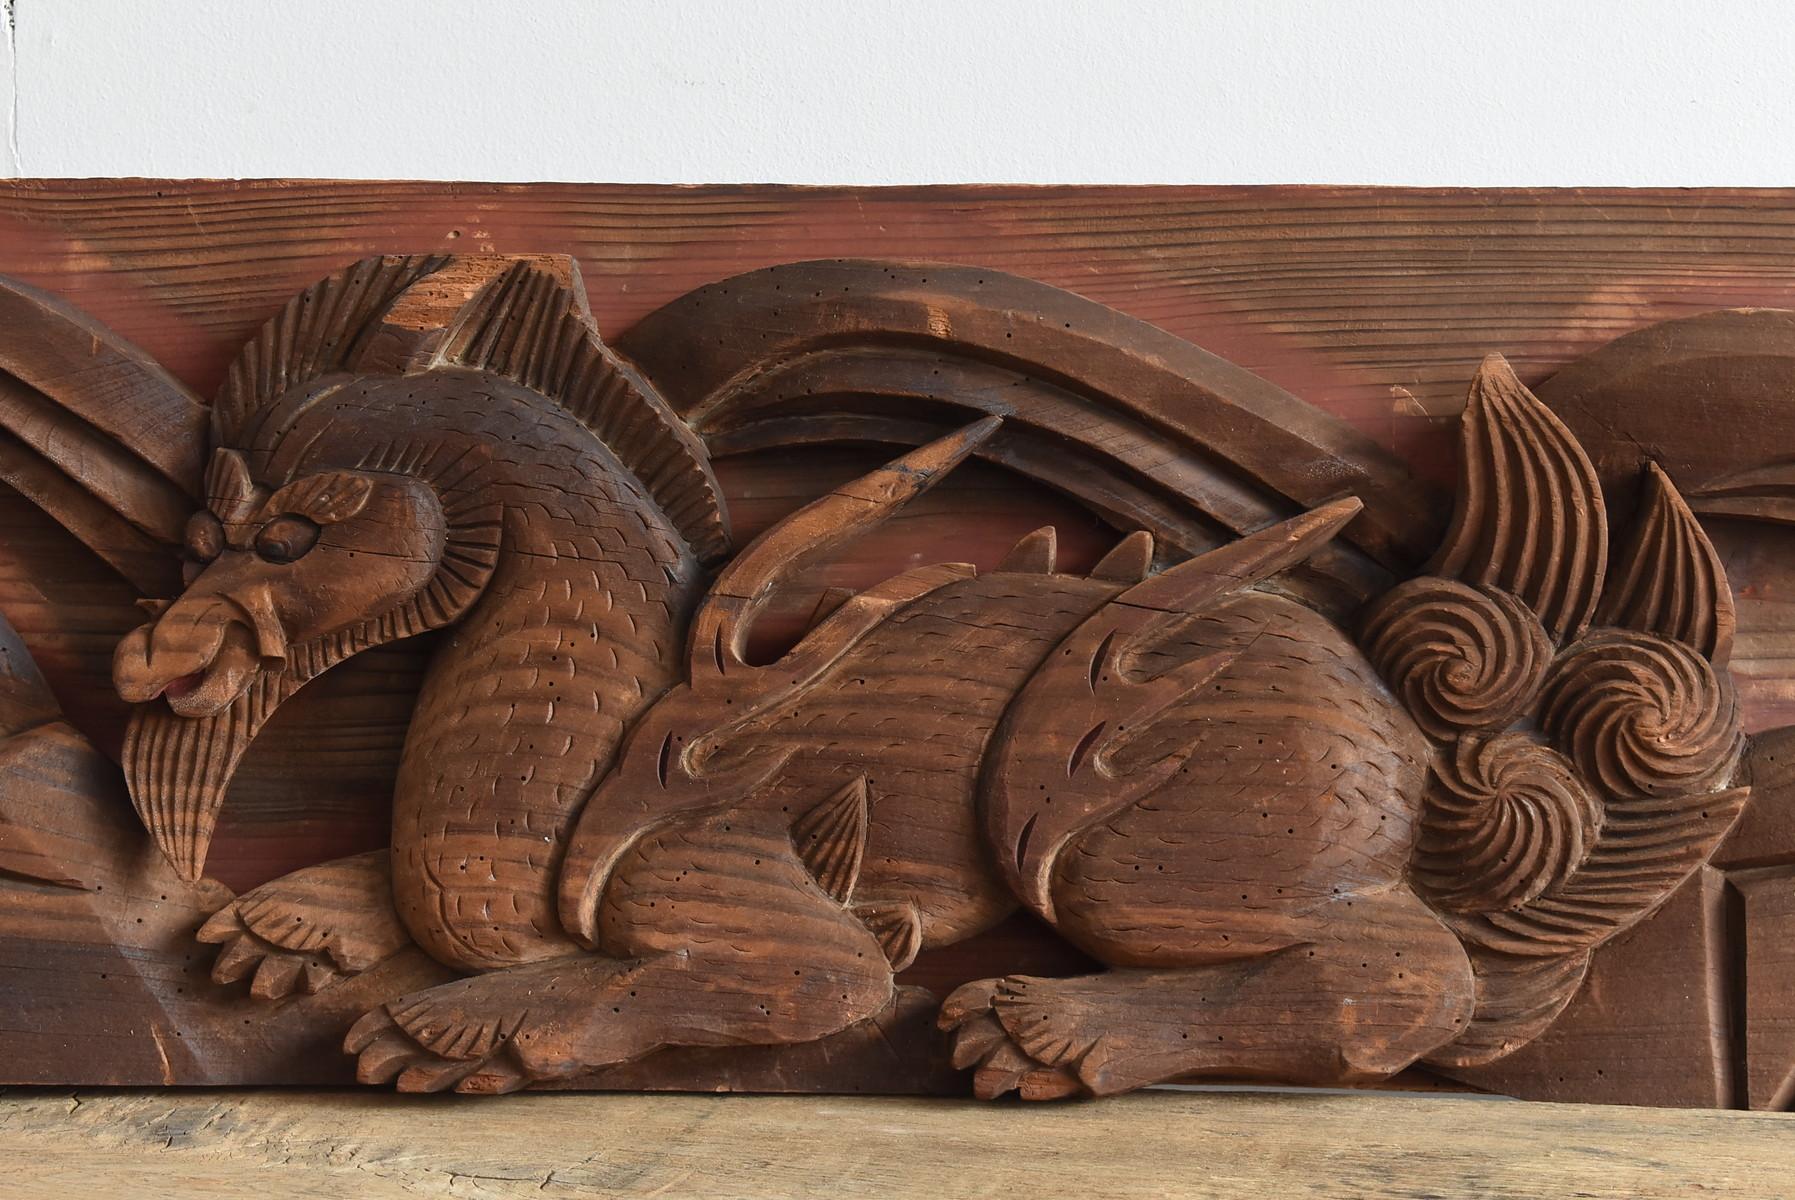 Hand-Carved Antique Wood Carvings at Japanese Shrines and Temples / Headboard / Wall Hanging